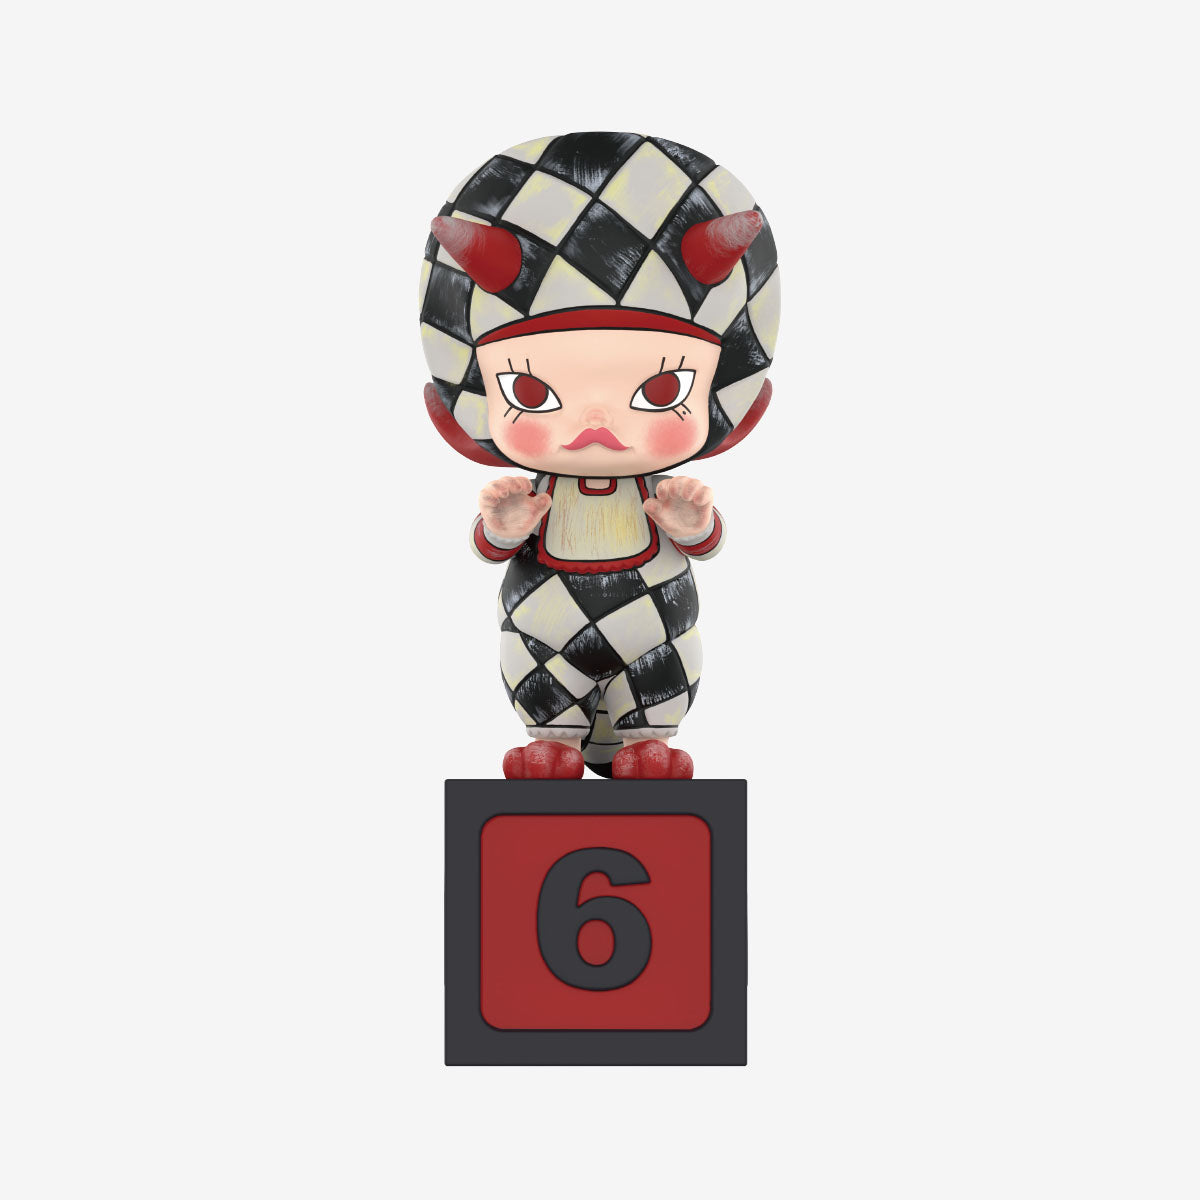 【New】Pop Mart Molly Anniversary Statues Classical Retro Series Blind Box Figures